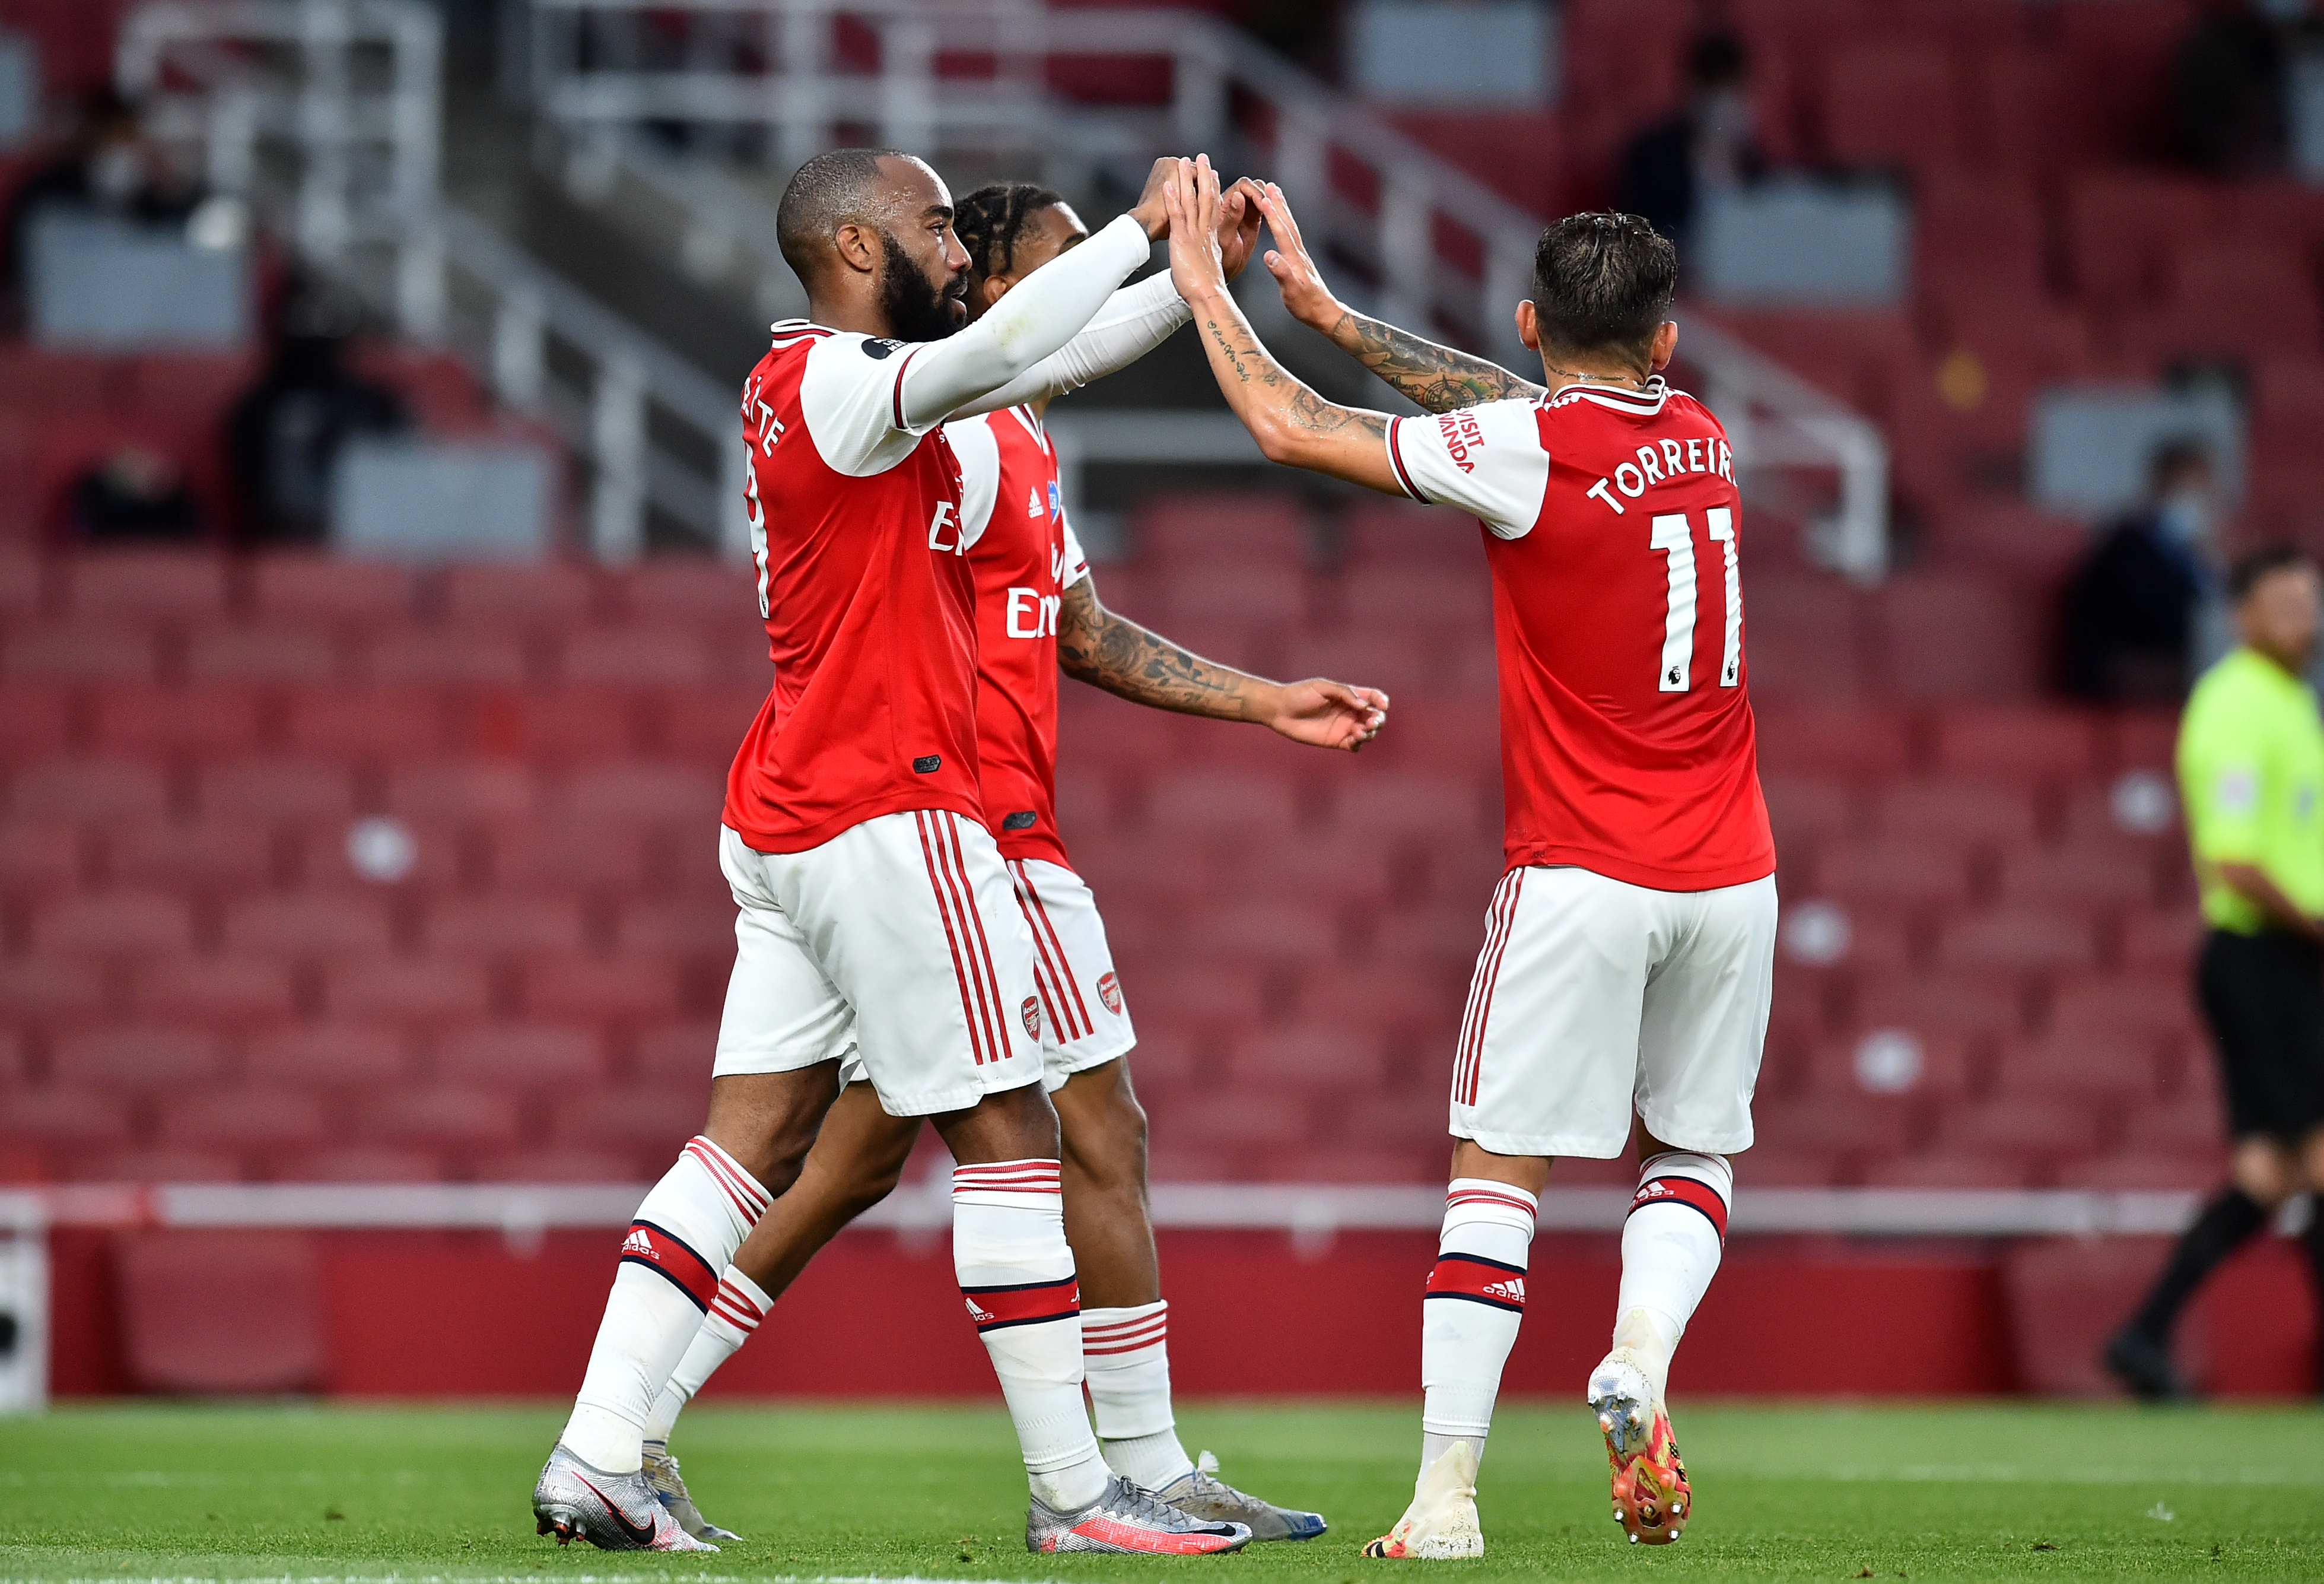 15 July 2020, England, London: Arsenal's Alexandre Lacazette (L) celebrates with his teammates after scoring his side's first goal during the English Premier League soccer match between Arsenal and Liverpool at the Emirates Stadium. Photo: Glyn Kirk/Nmc Pool/PA Wire/dpa